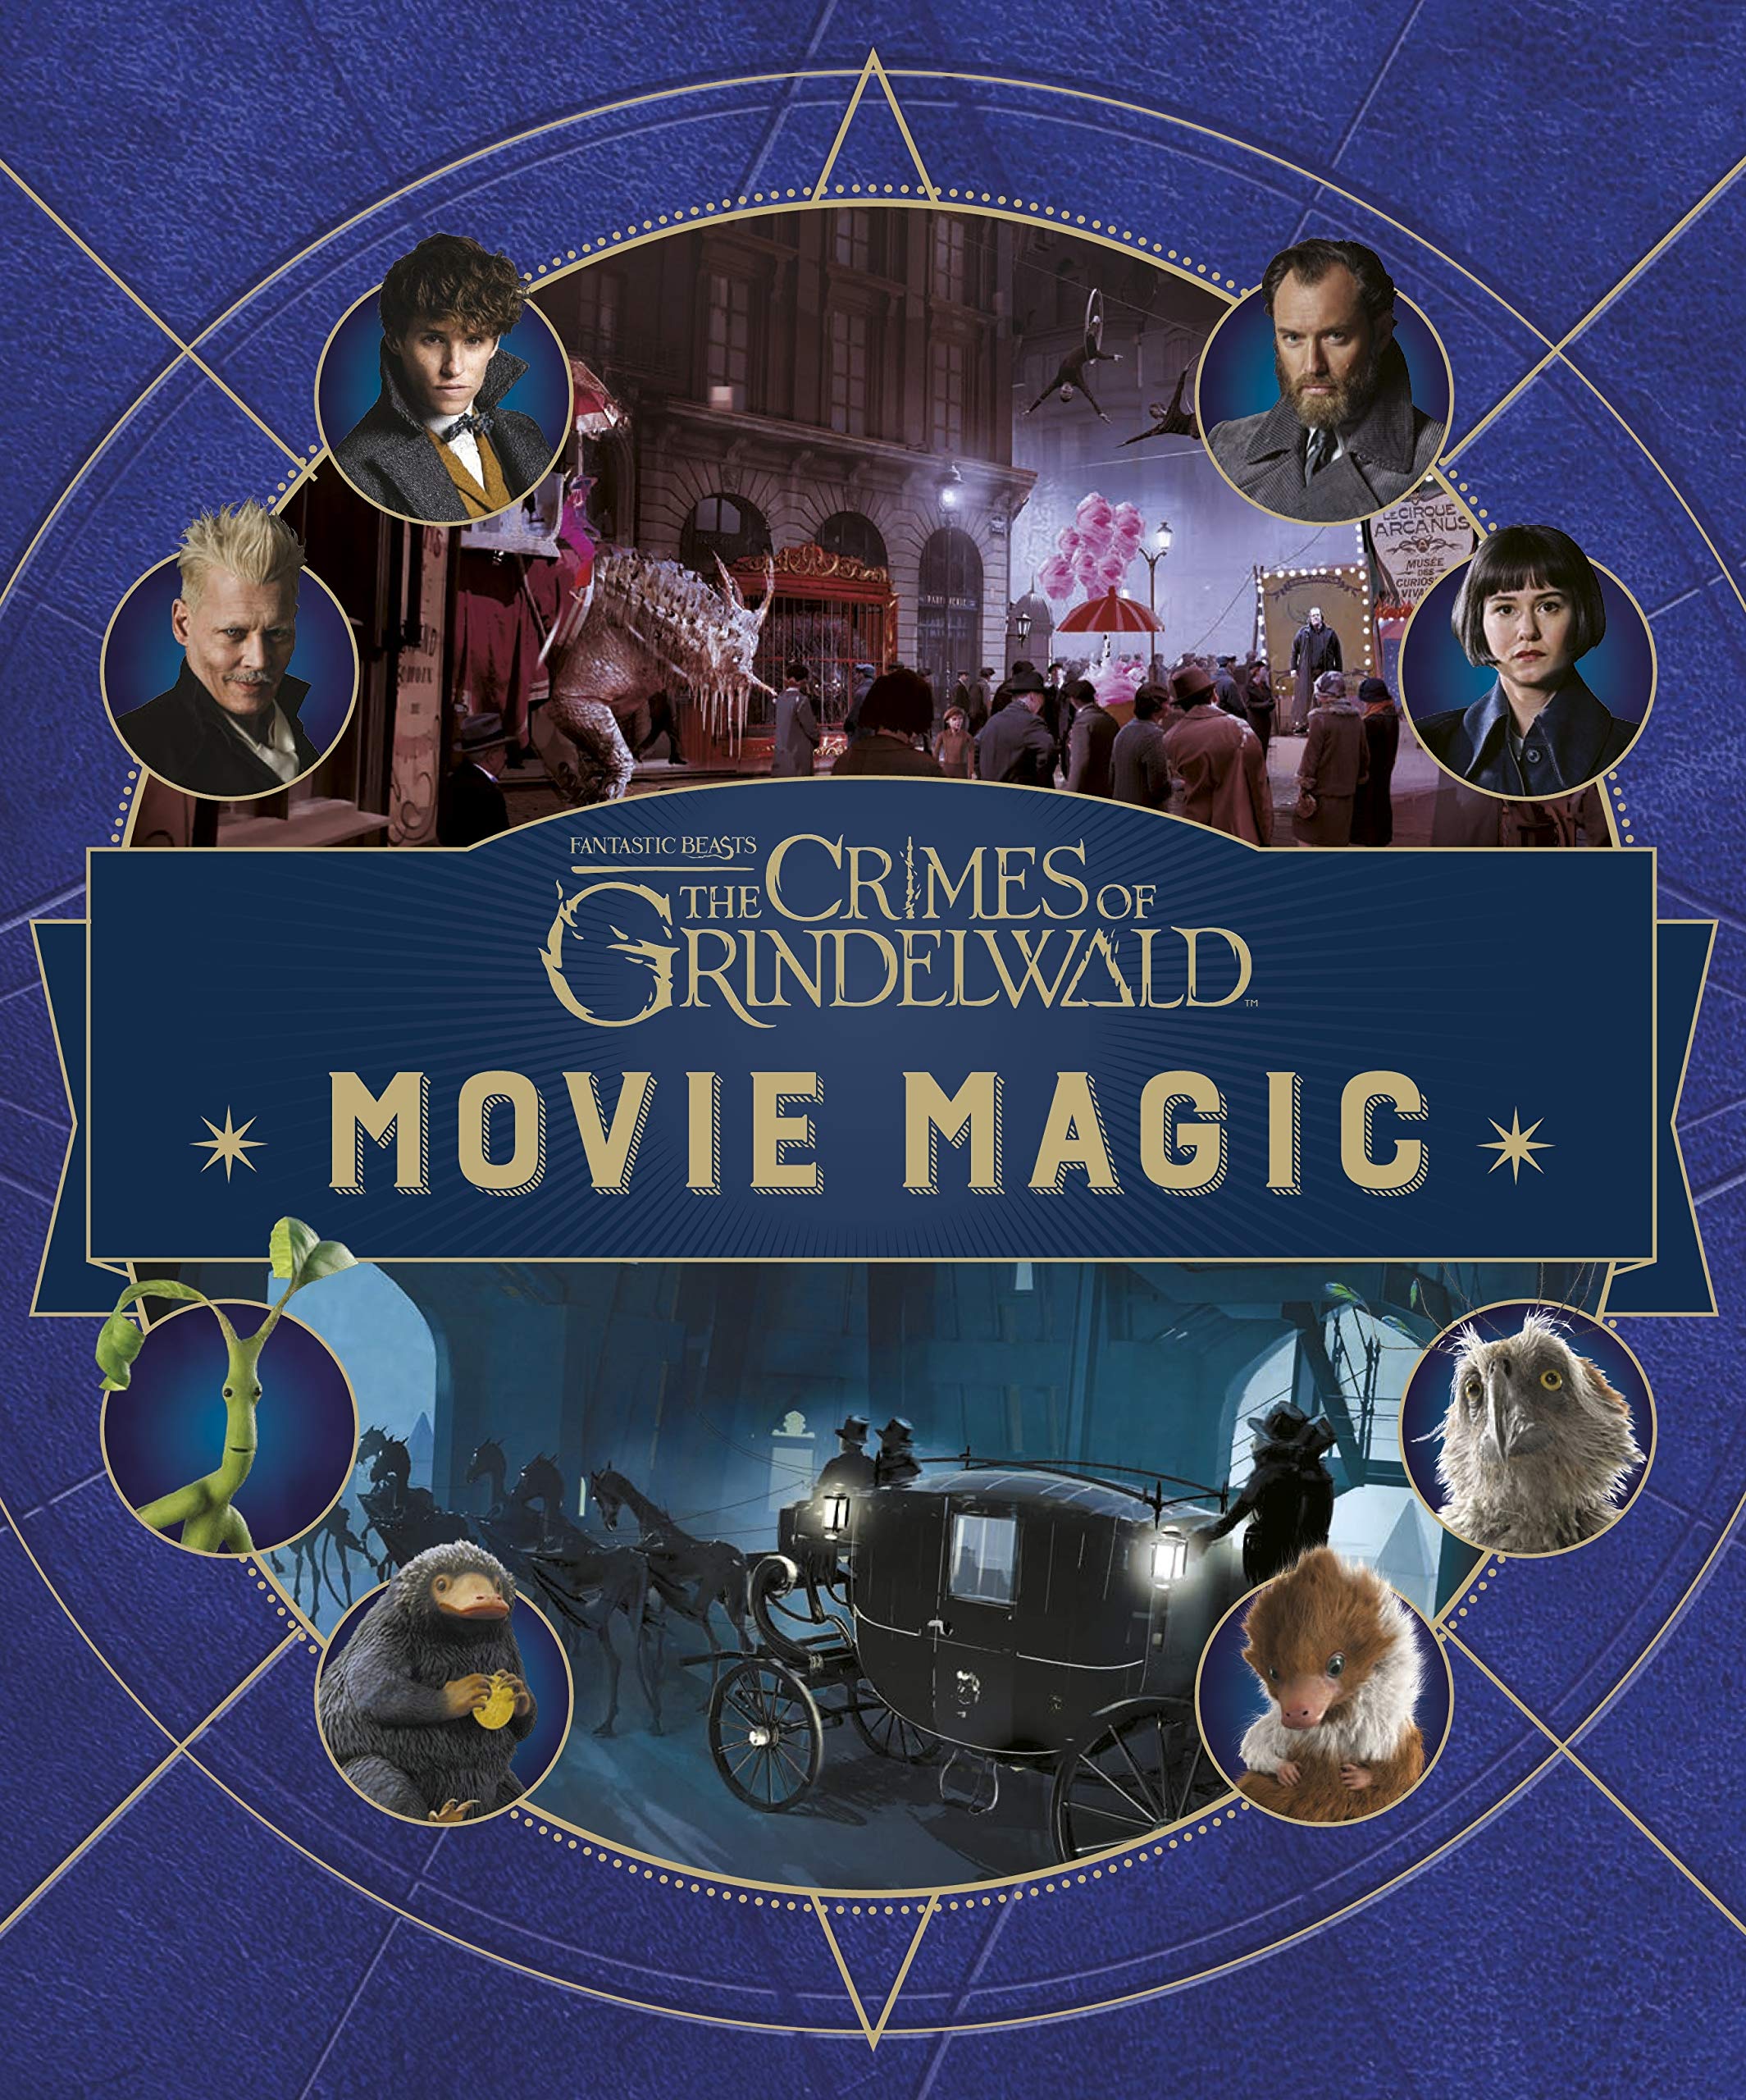 The Crimes of Grindelwald: Movie Magic